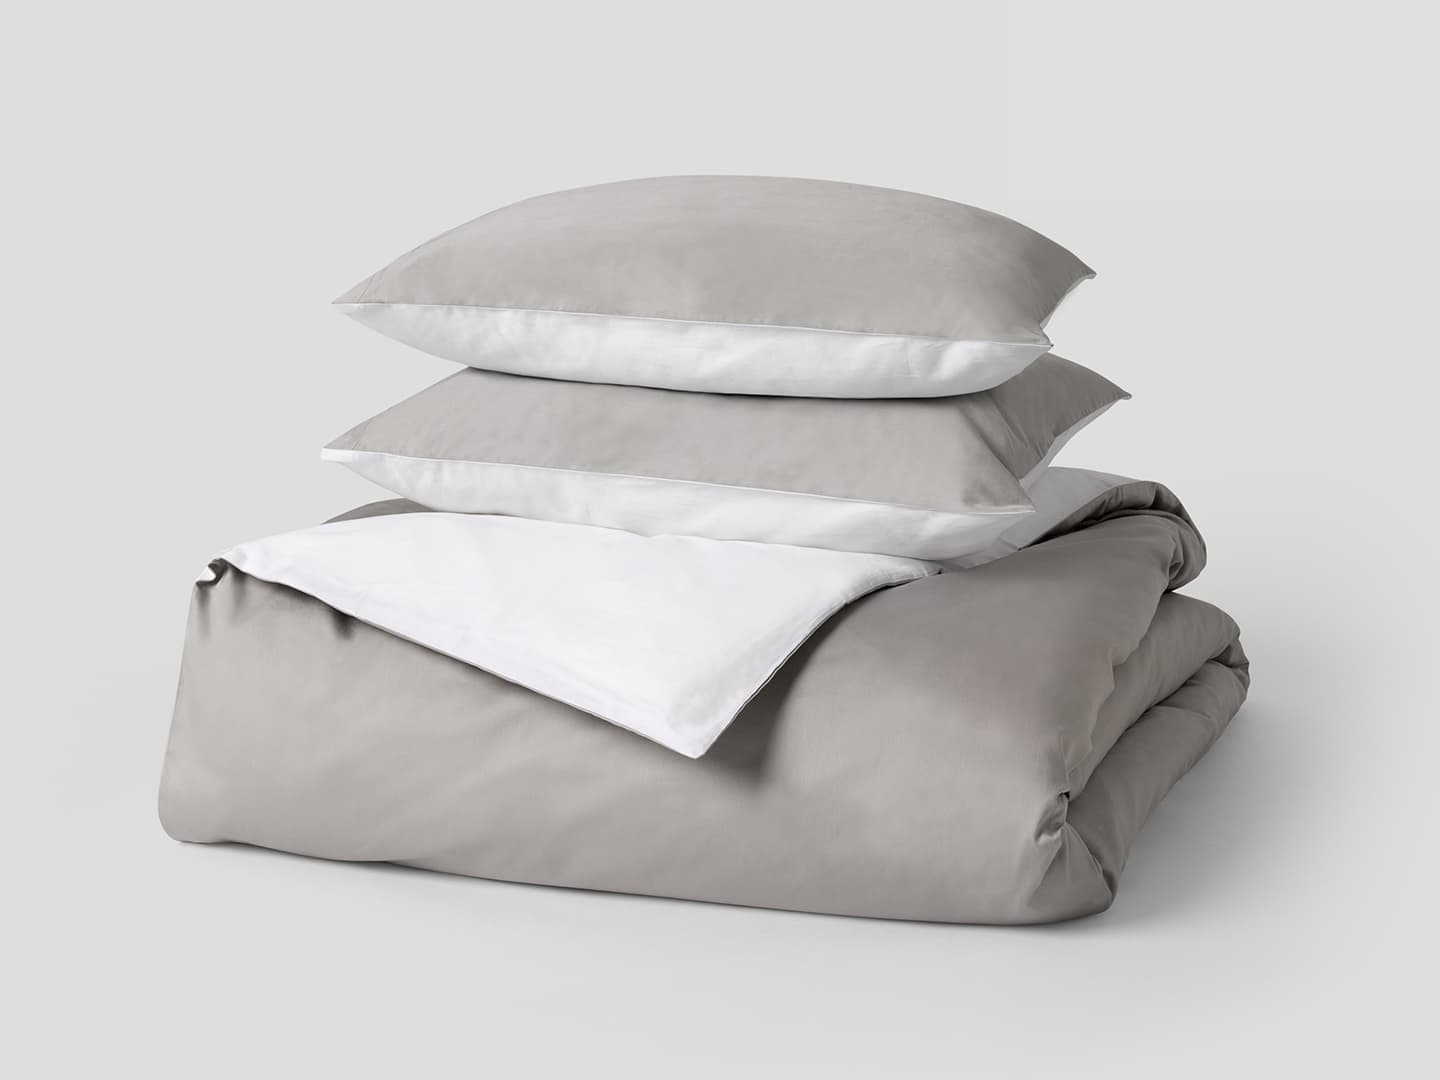 Duvet Cover Tvenne - Concrete Grey / Cloud White in the group Bedding / Duvet Covers at A L V A (1248)